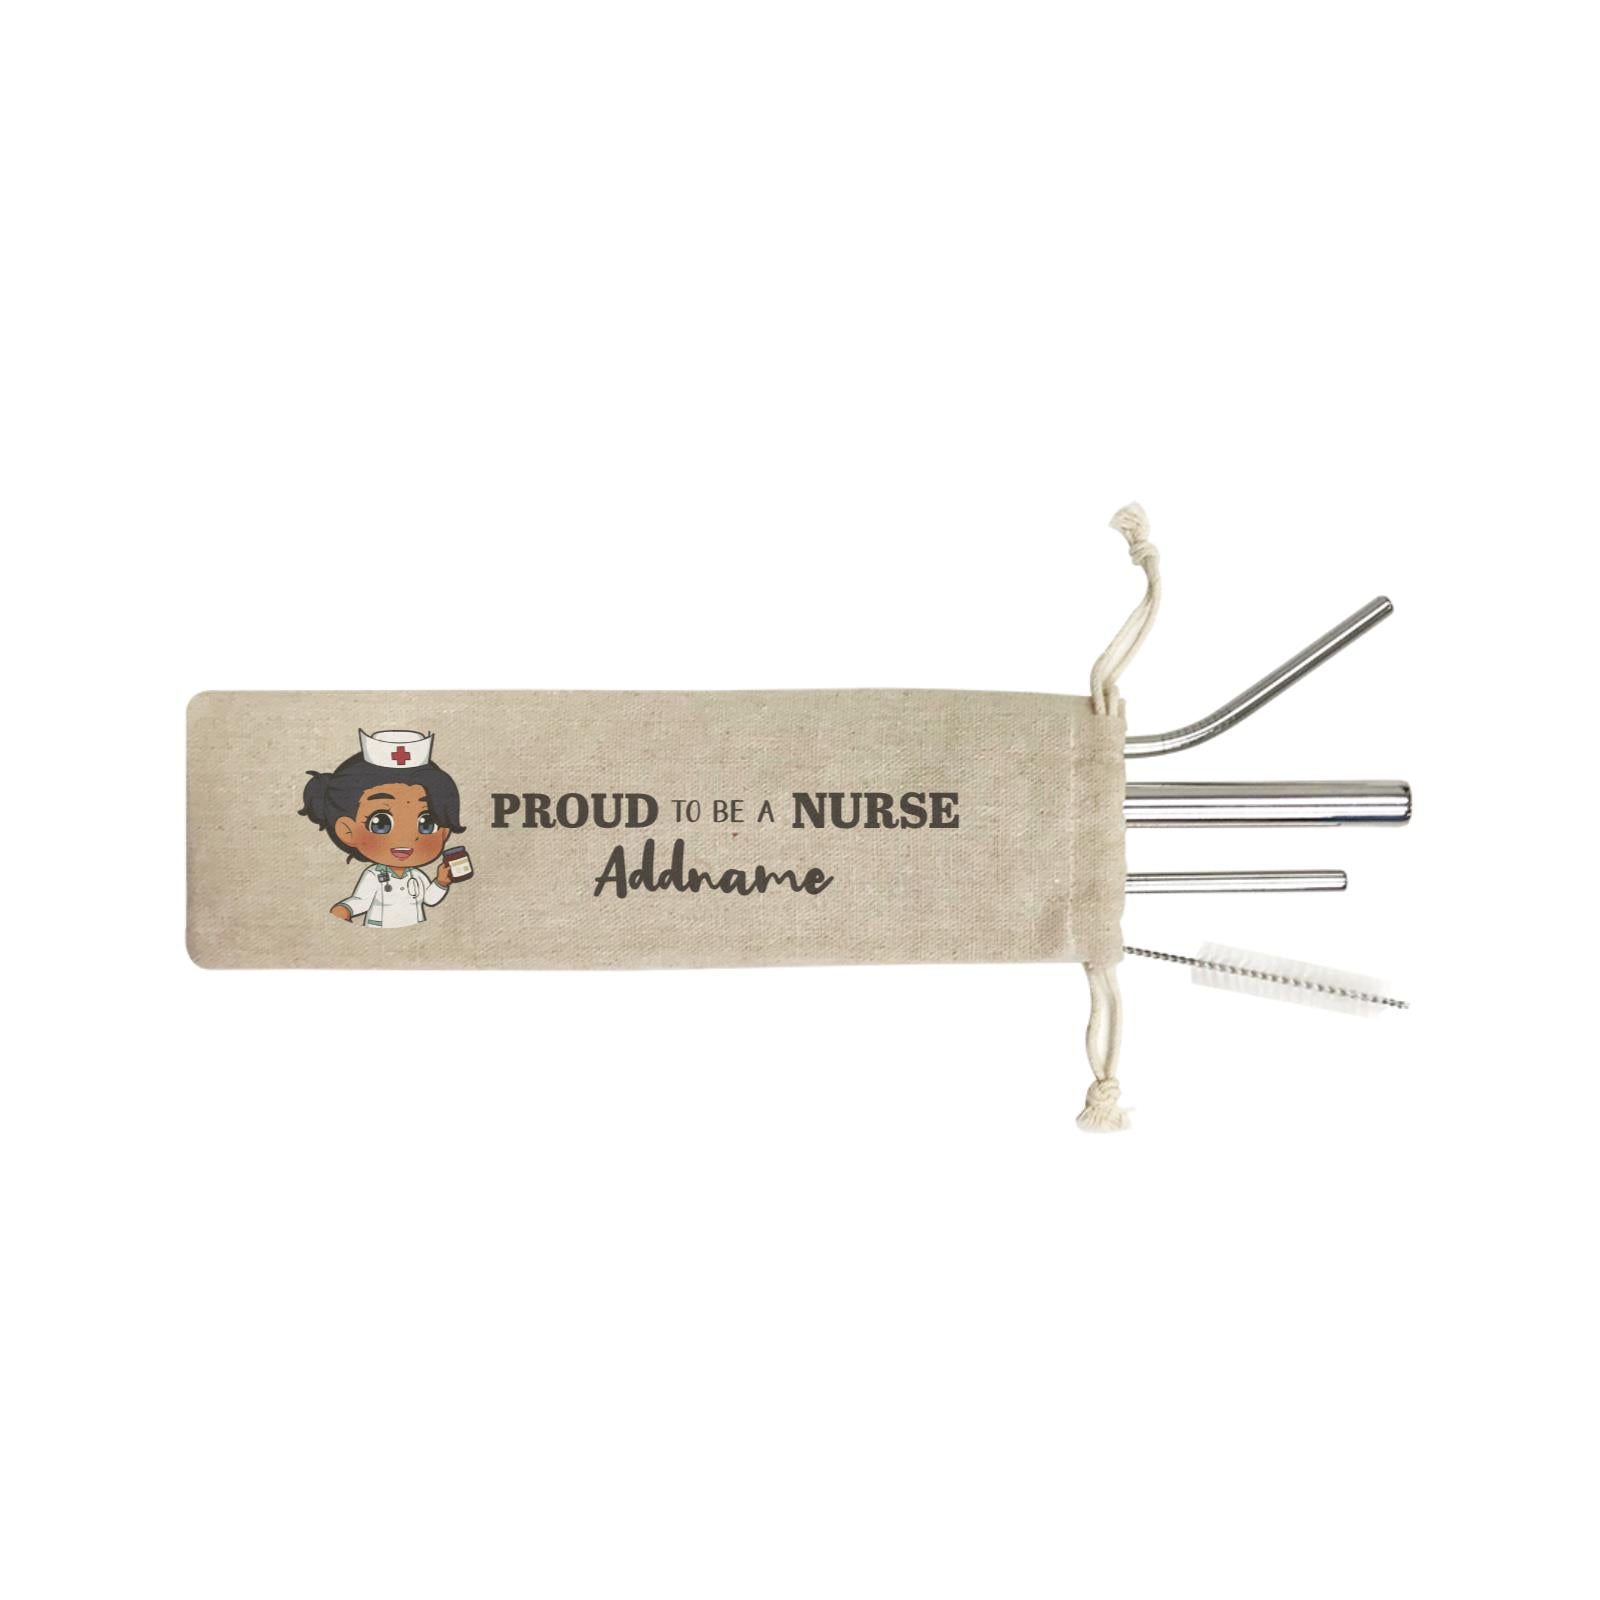 Proud To Be A Nurse Chibi Female Indian SB 4-in-1 Stainless Steel Straw Set In a Satchel